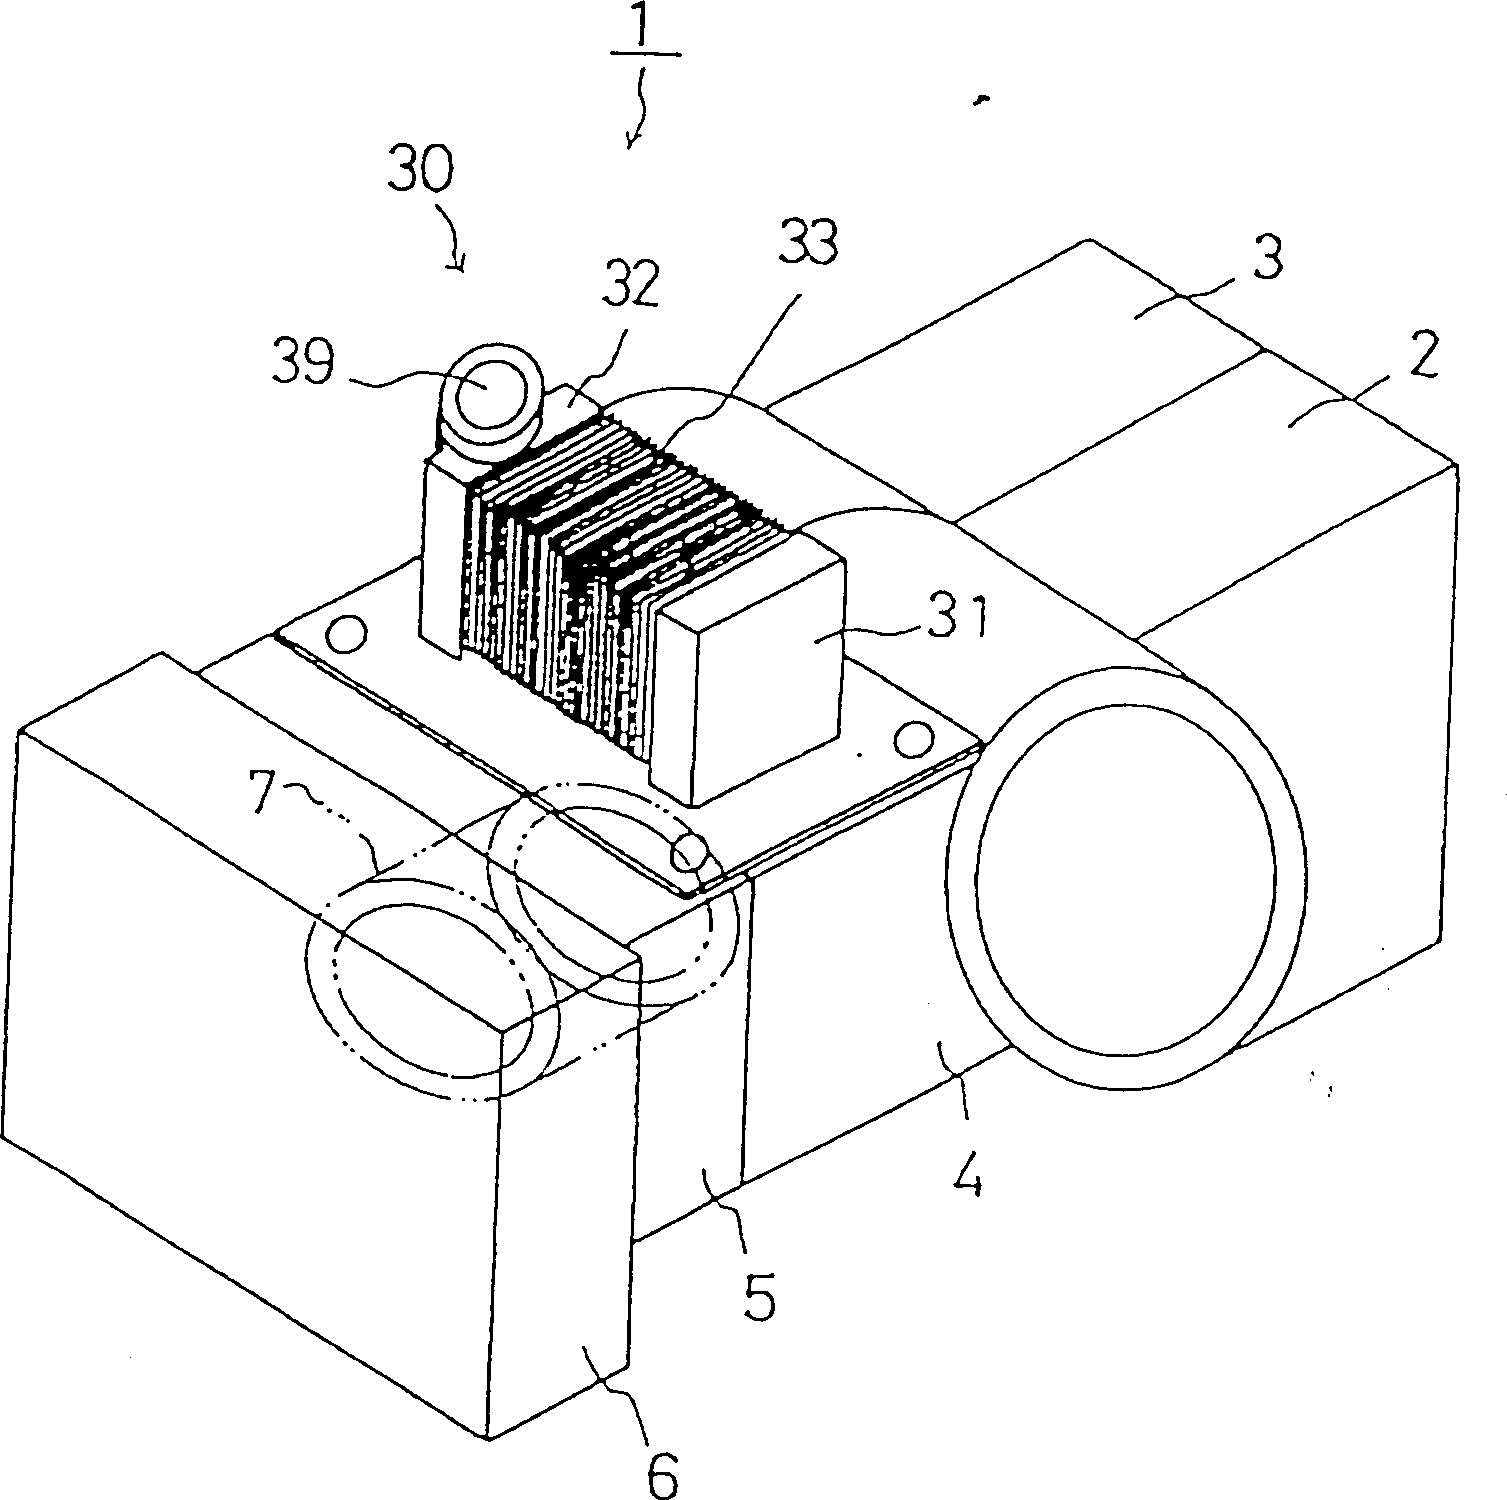 Cooling device for water-cooled IC engine